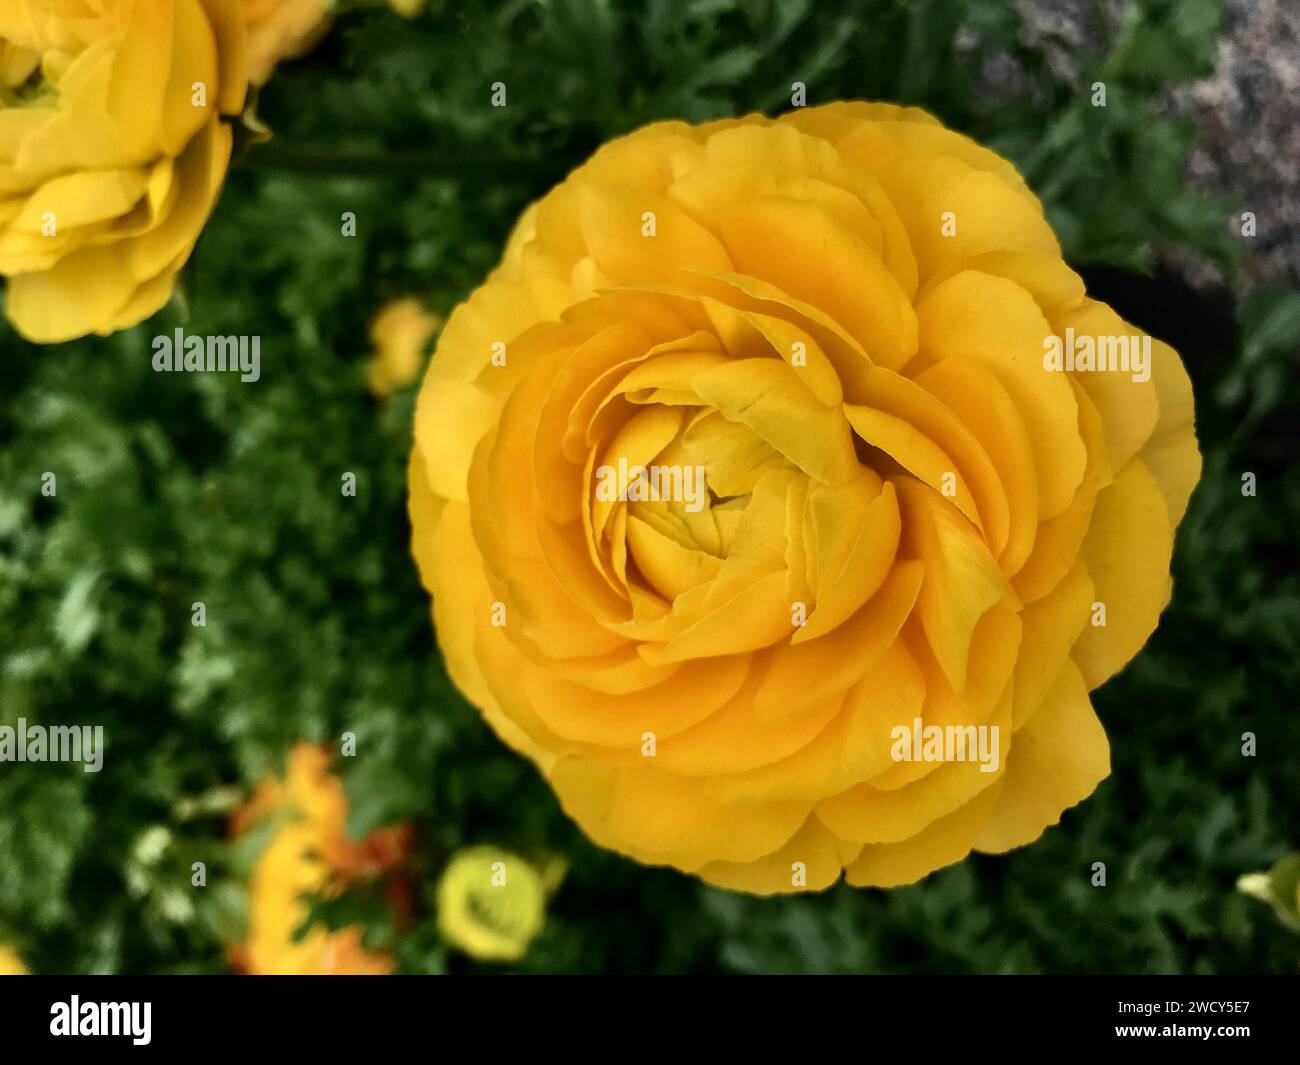 A group of vibrant yellow flowers blooming on the ground Stock Photo